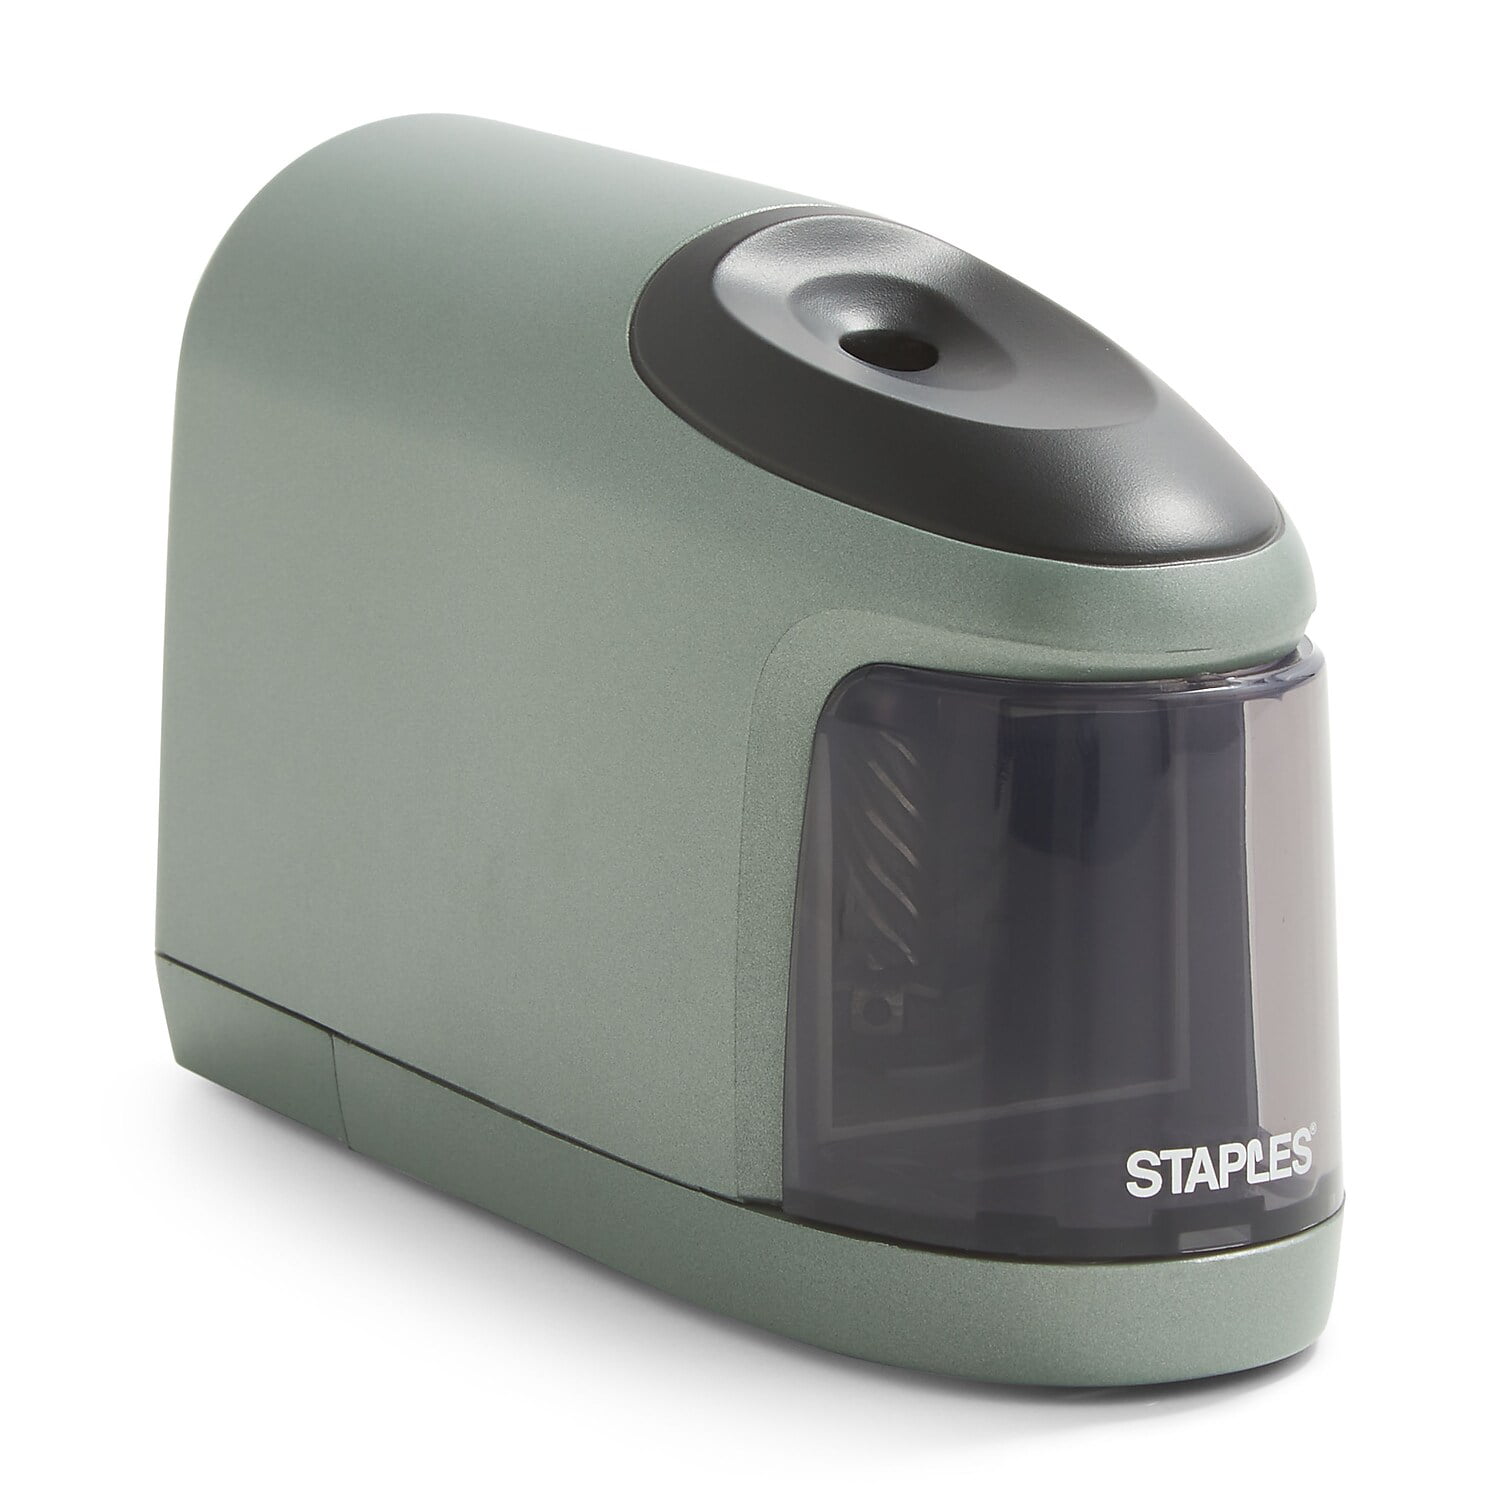 Staples BRAND Power Extreme Electric Pencil Sharpener 21834 for sale online 